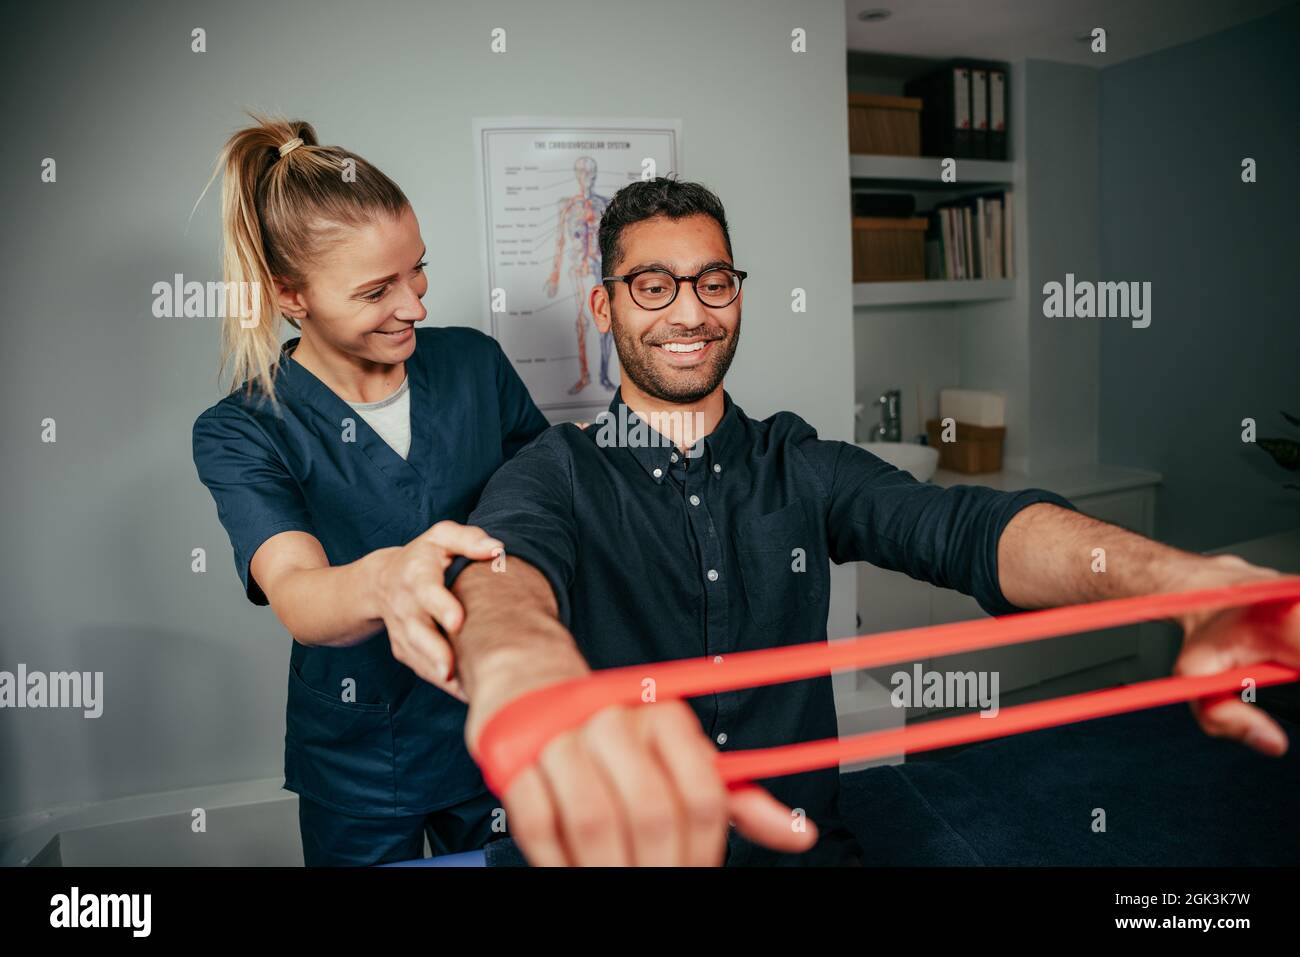 Caucasian female physiotherapist assisting male patient holding resistance band Stock Photo